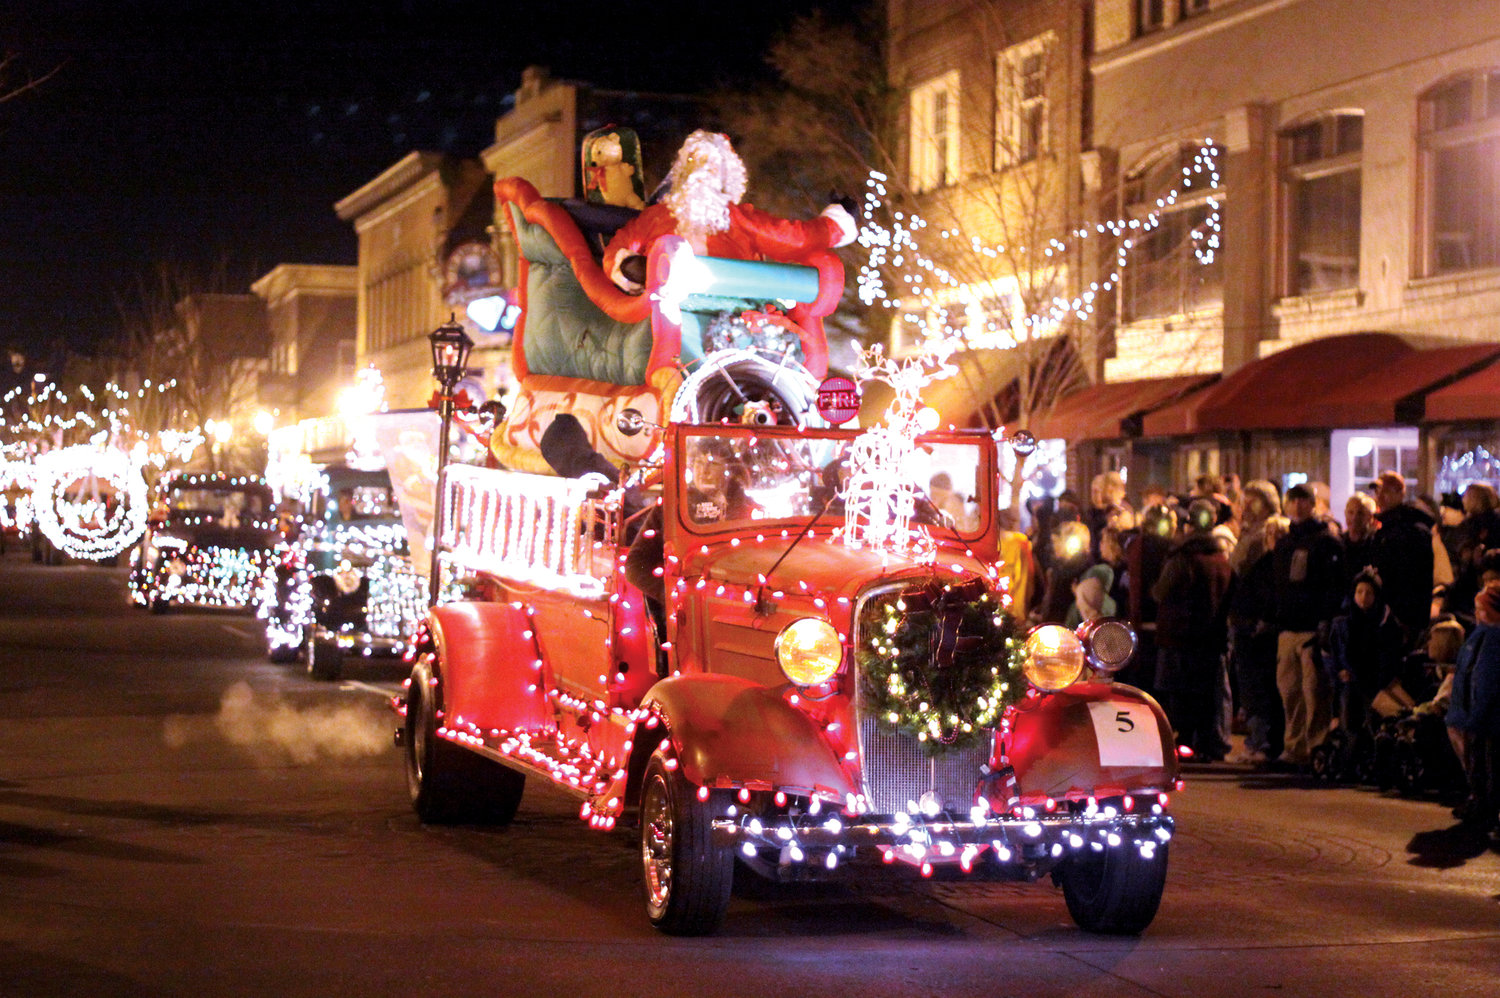 FILE PHOTO — Vehicles decorated with holiday finery stream down Tower Street in Centralia during the Centralia Downtown Association's second annual Lighted Tractor Parade in 2011.